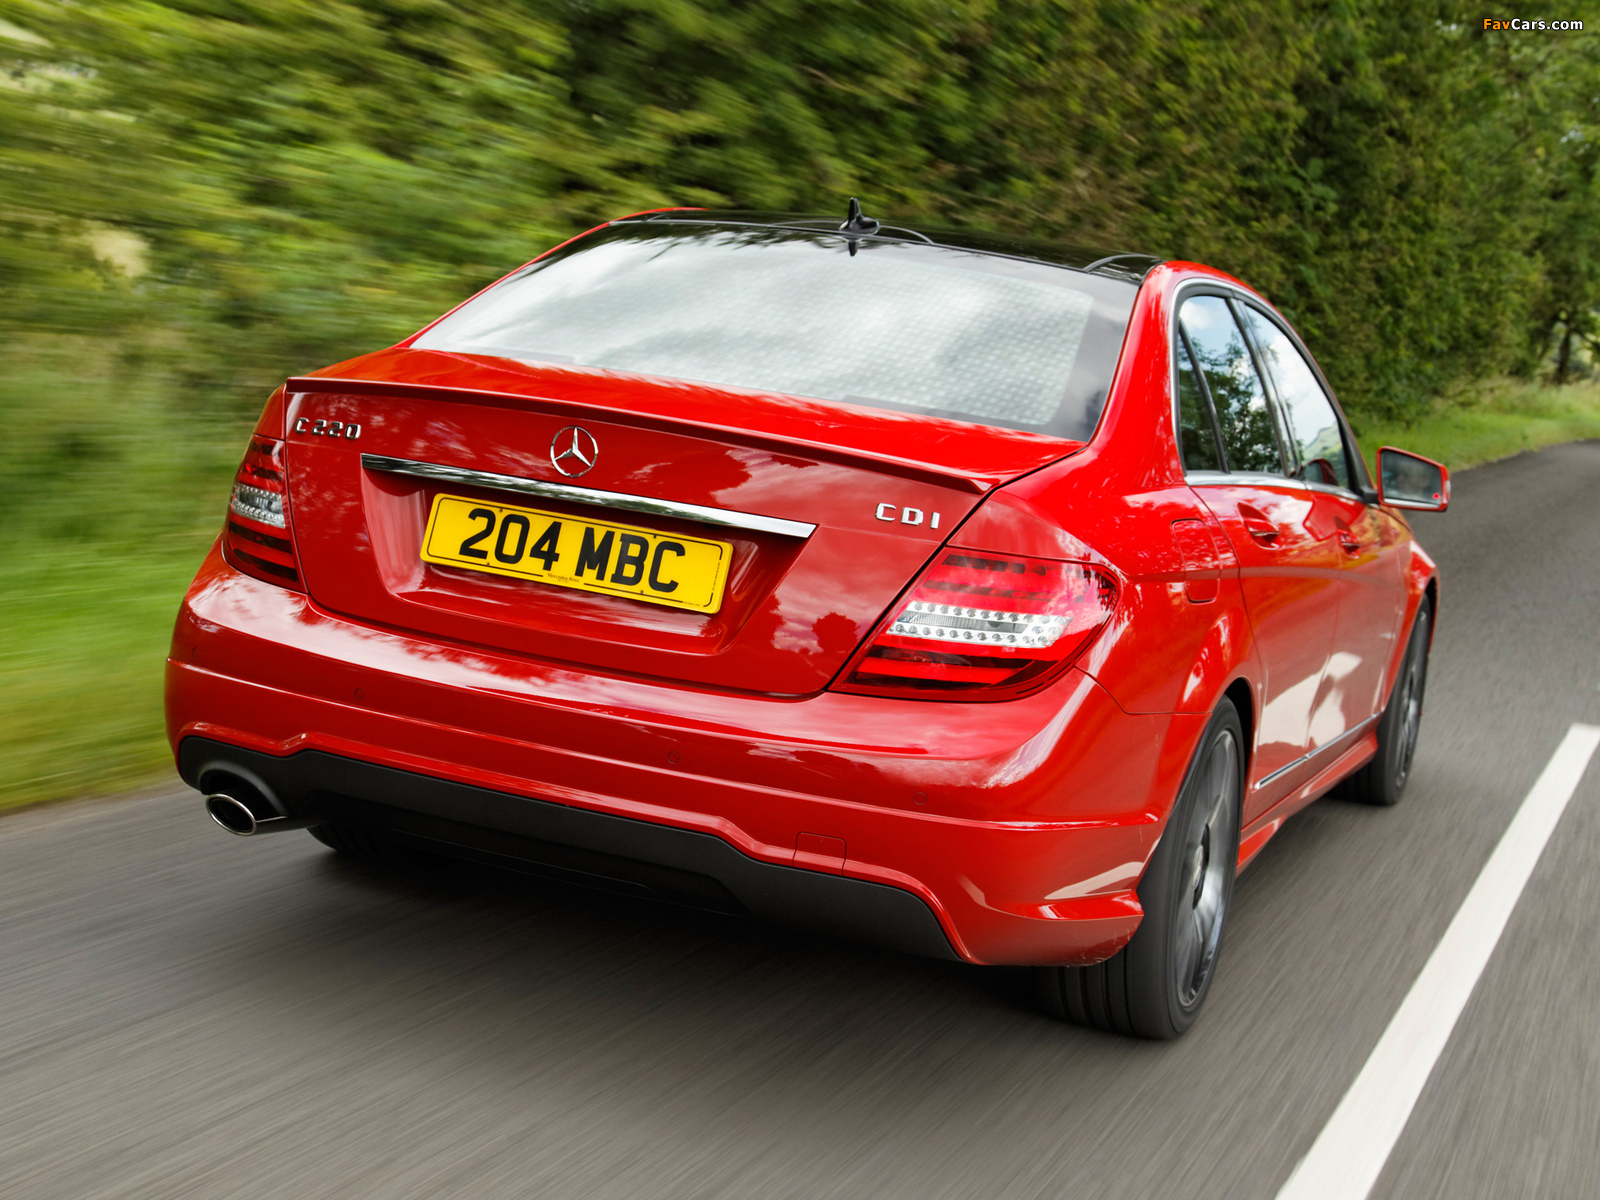 Mercedes-Benz C 220 CDI AMG Sports Package UK-spec (W204) 2011 wallpapers (1600 x 1200)